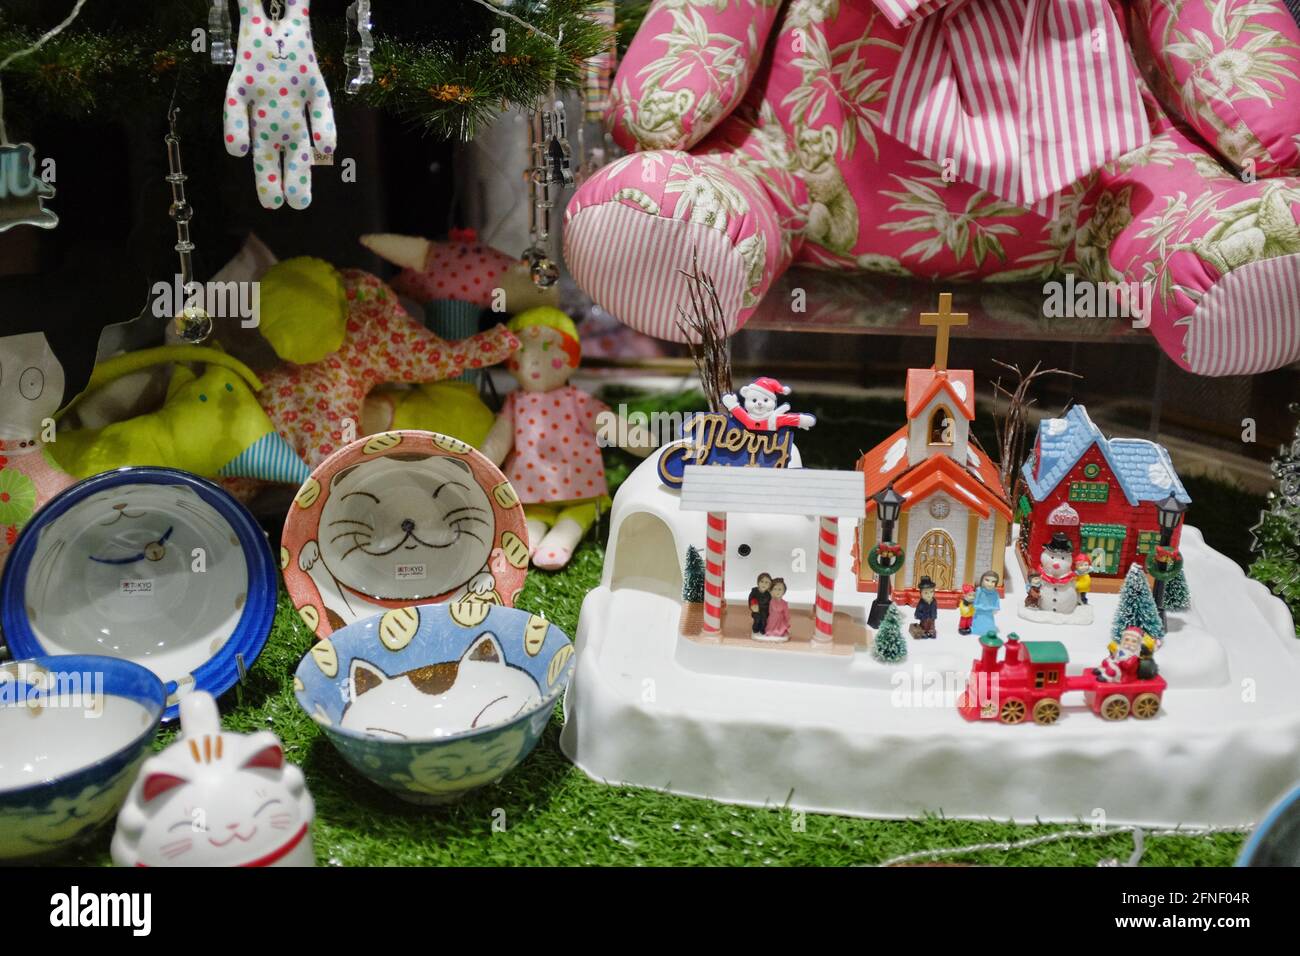 https://c8.alamy.com/comp/2FNF04R/figurines-and-home-dcor-items-for-sale-in-a-shop-in-ste-near-montpellier-occitanie-south-of-france-sud-de-france-2FNF04R.jpg